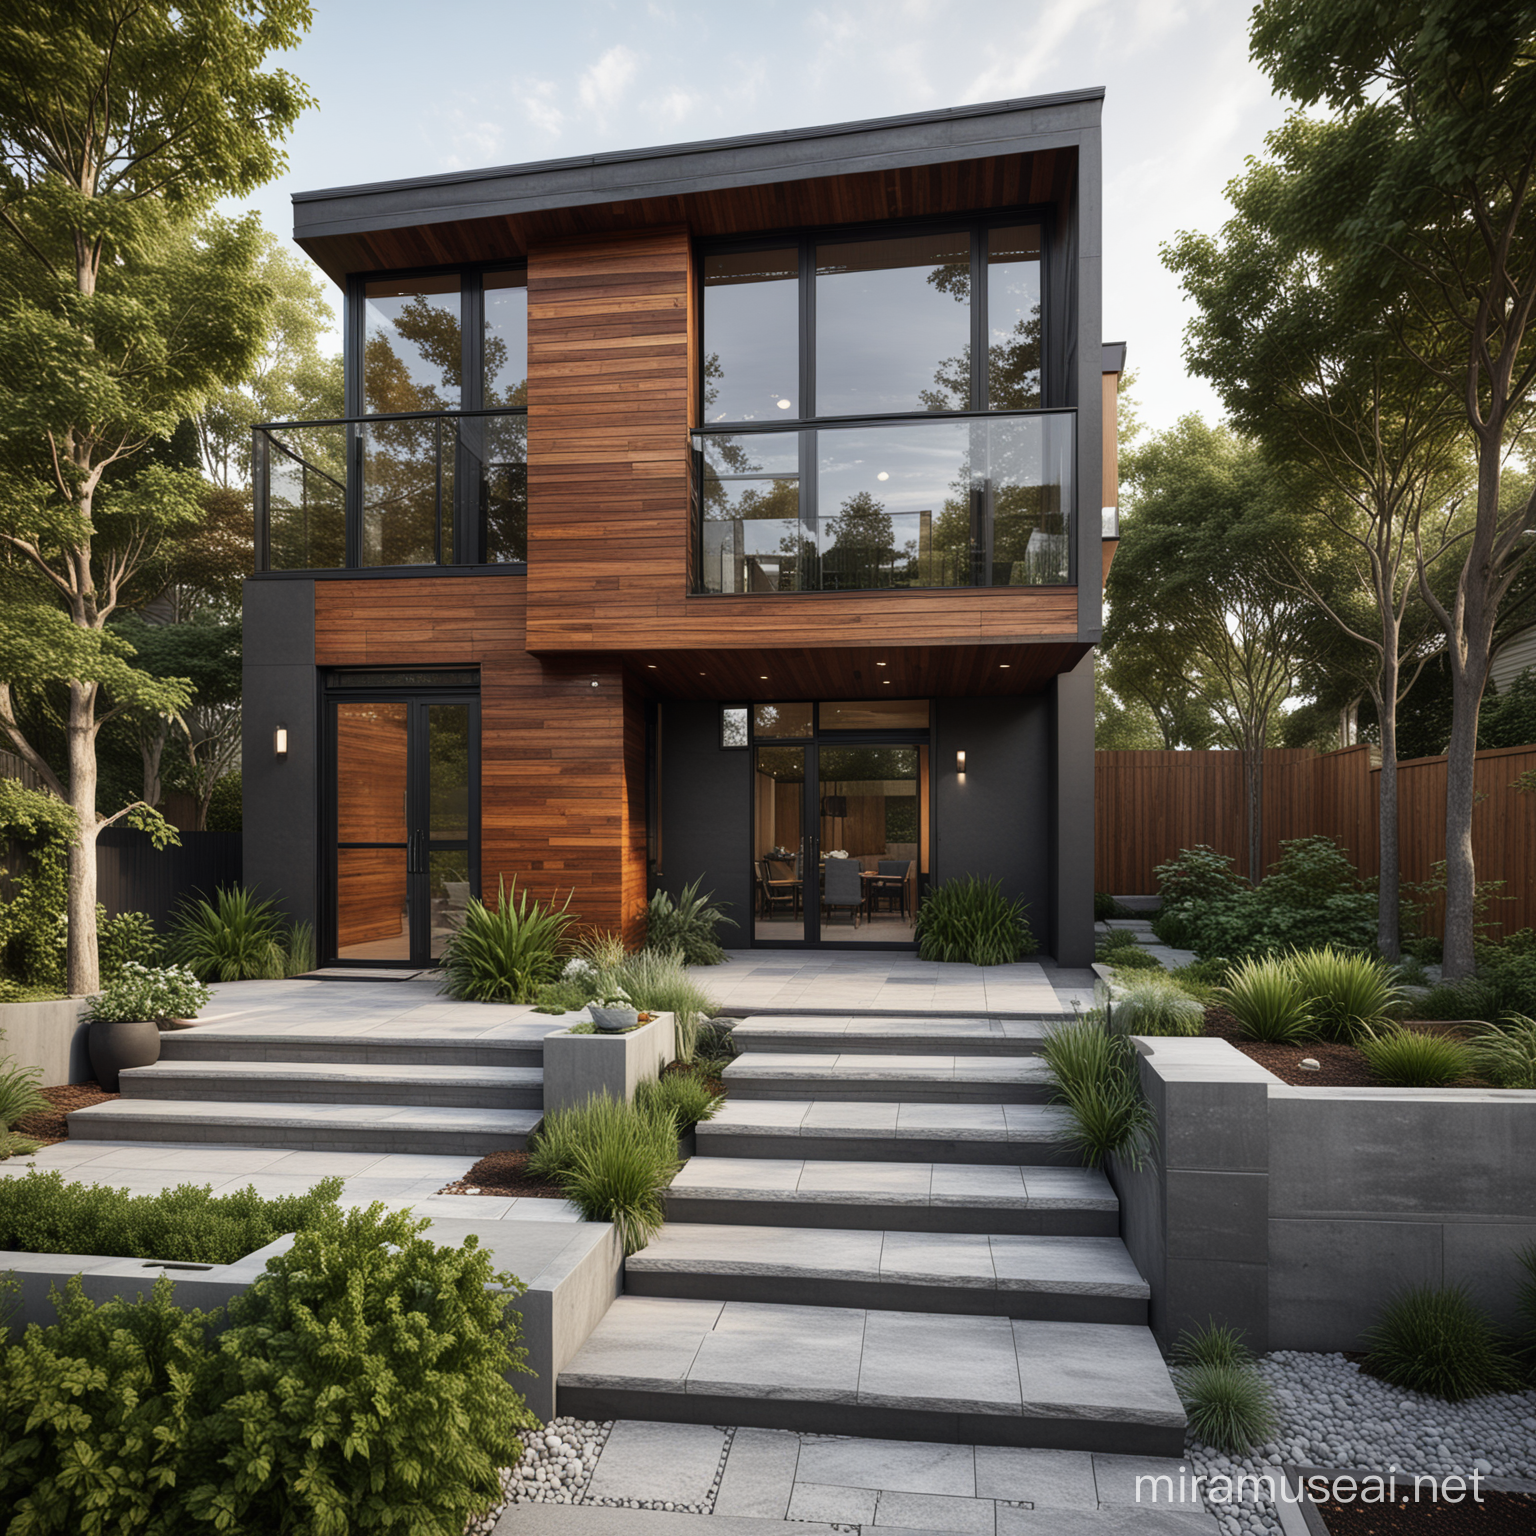 A digital illustration of a contemporary two-story house with a mix of dark metal and rich wood textures. The architecture features sharp geometric shapes, including a prominent boxy design with a protruding glass window structure. The house is elevated on pillings, creating an open space underneath with accent lighting. A modern exterior staircase connects the ground to the upper level. Landscaping around the house includes lush greenery, shrubs, and small trees. The environment is residential with a focus on clean lines and minimalist aesthetic, and a comfortable outdoor seating area is visible.